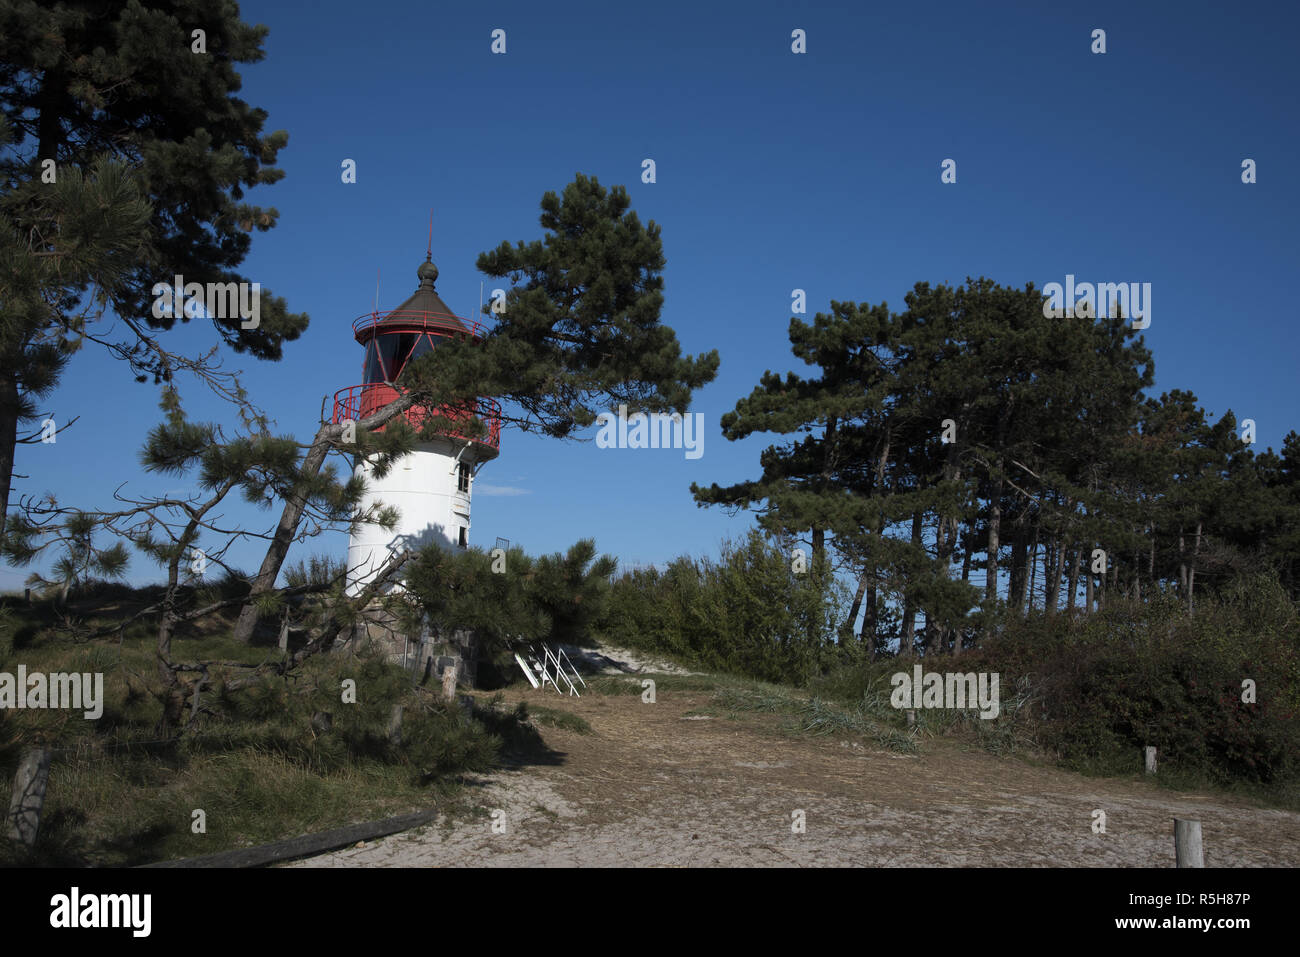 Lighthouse at Gellen on the southern part of Hiddensee which is an island in the Baltic Sea west of Germany's largest island Rügen. Stock Photo